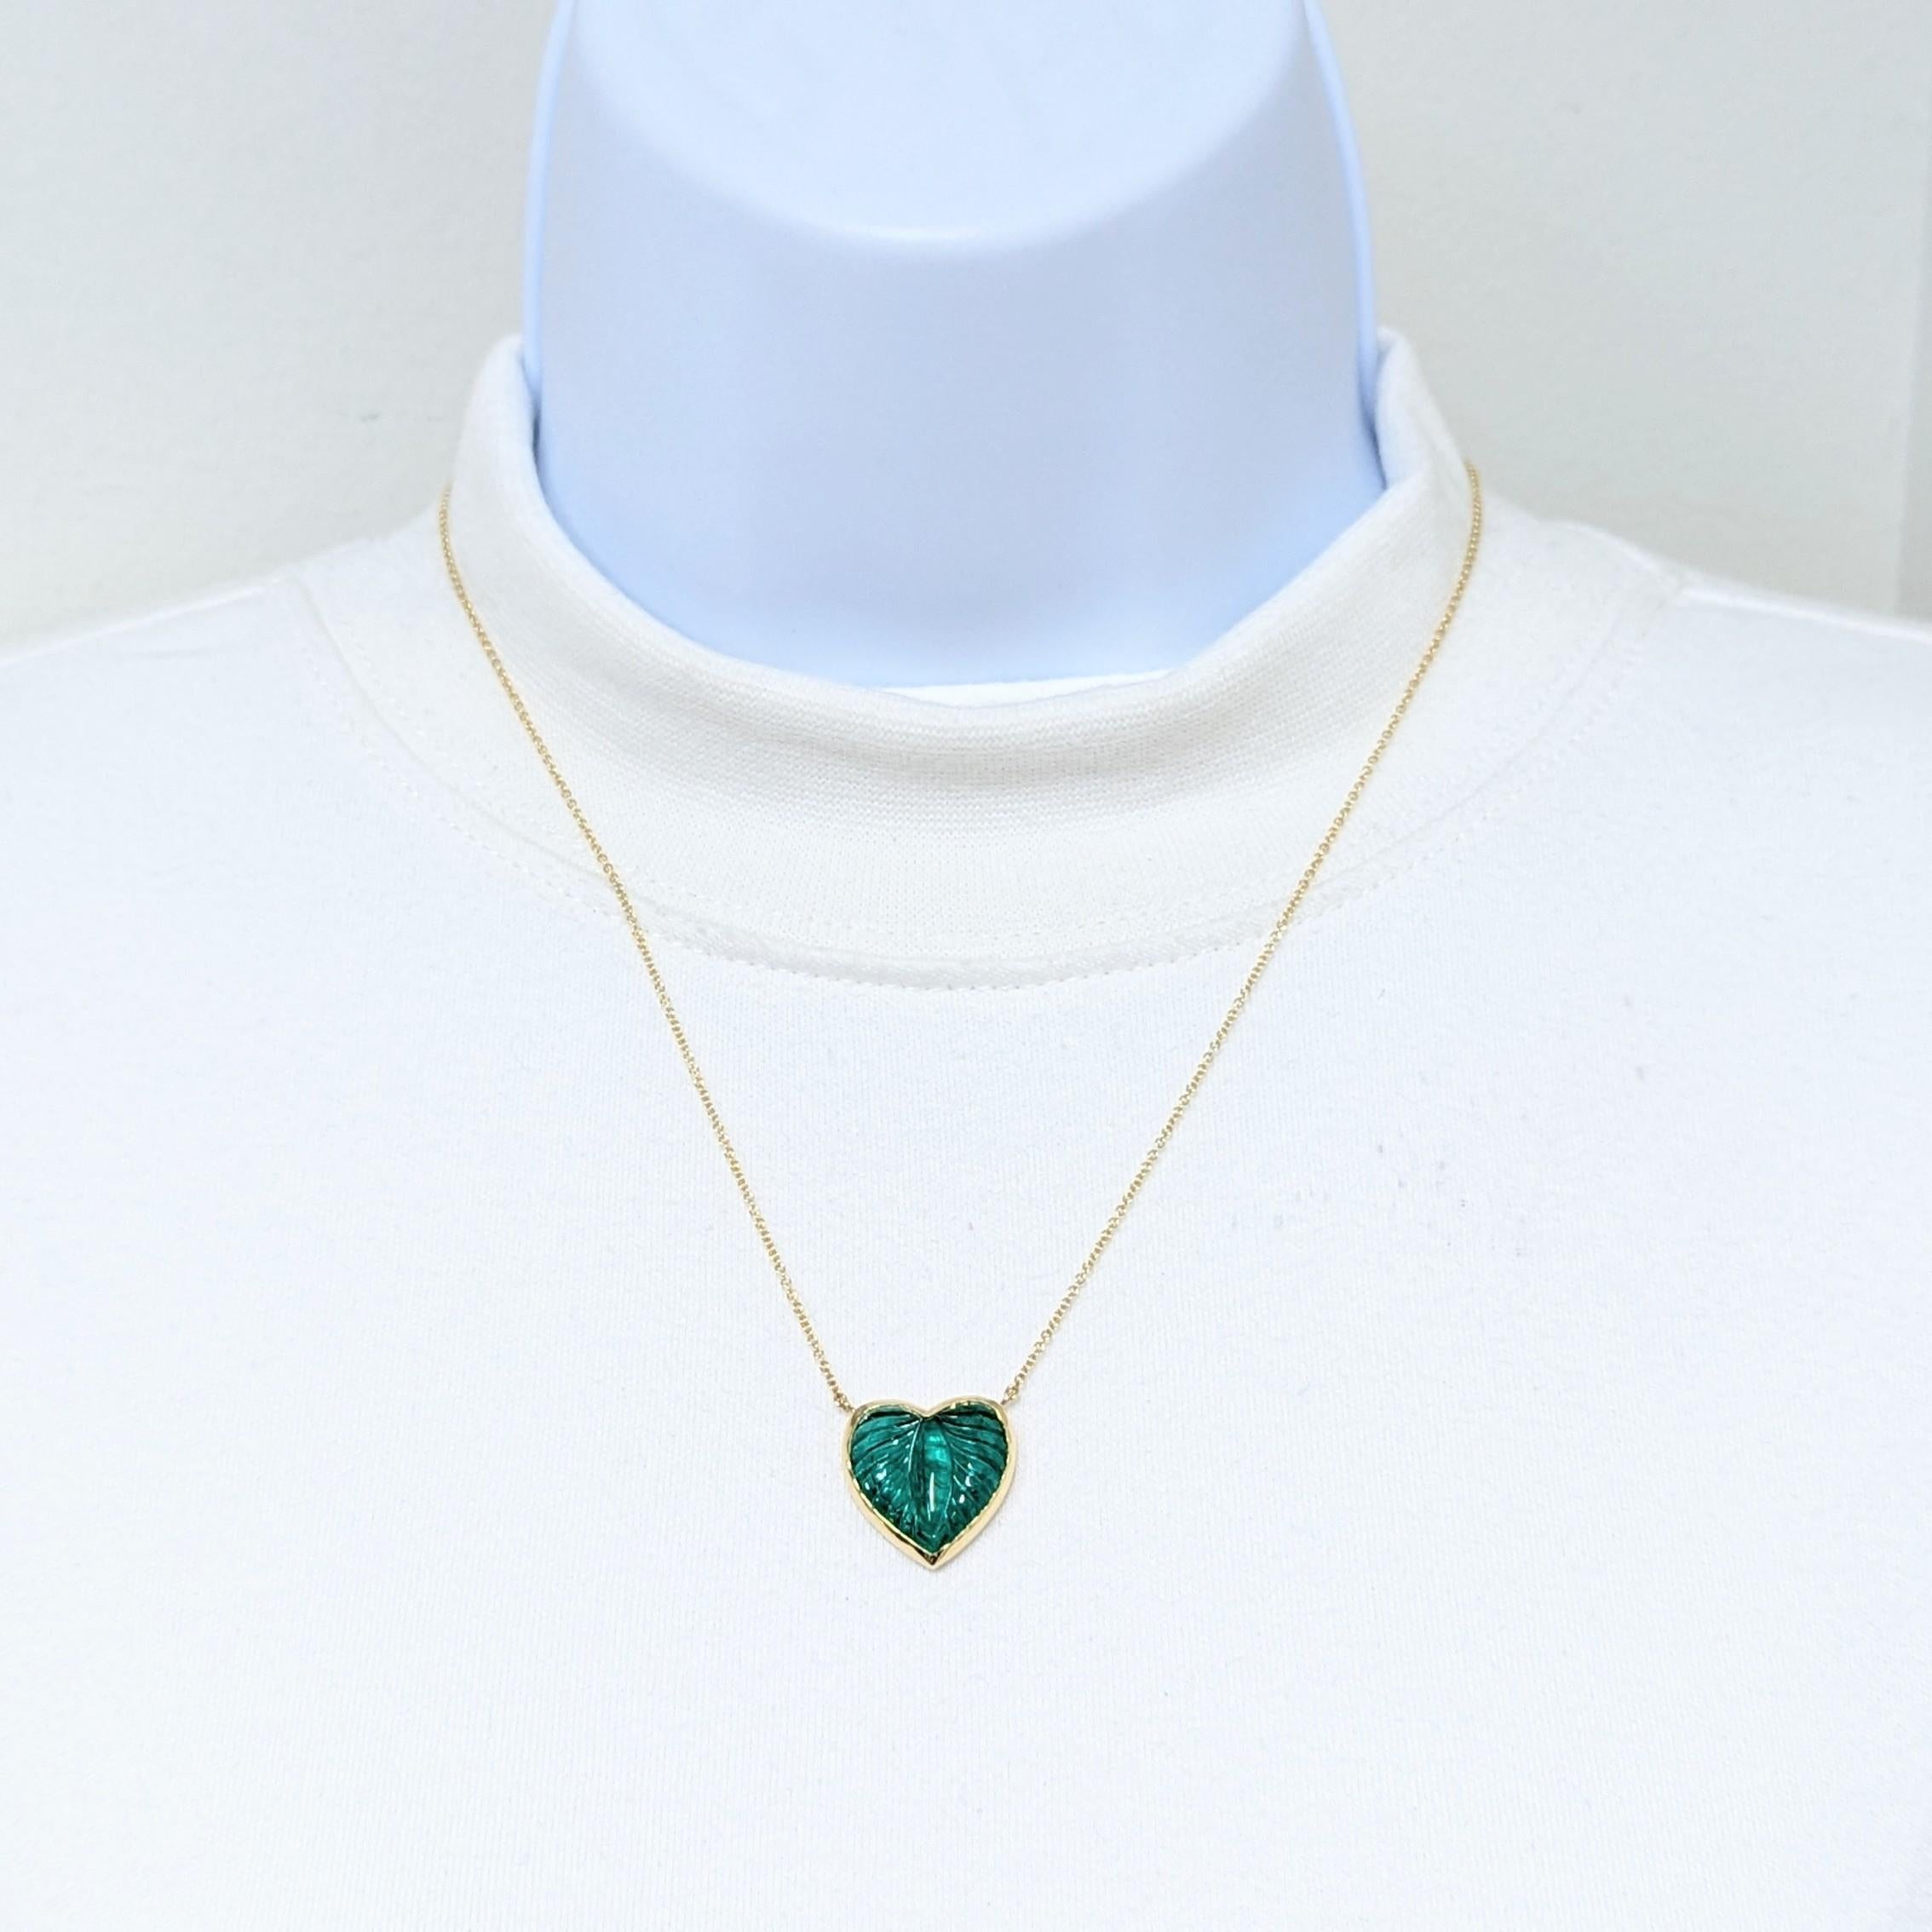 Beautiful 9.59 ct. carved emerald heart shape in a handmade 18k yellow gold mounting and chain.  Length is 18.5